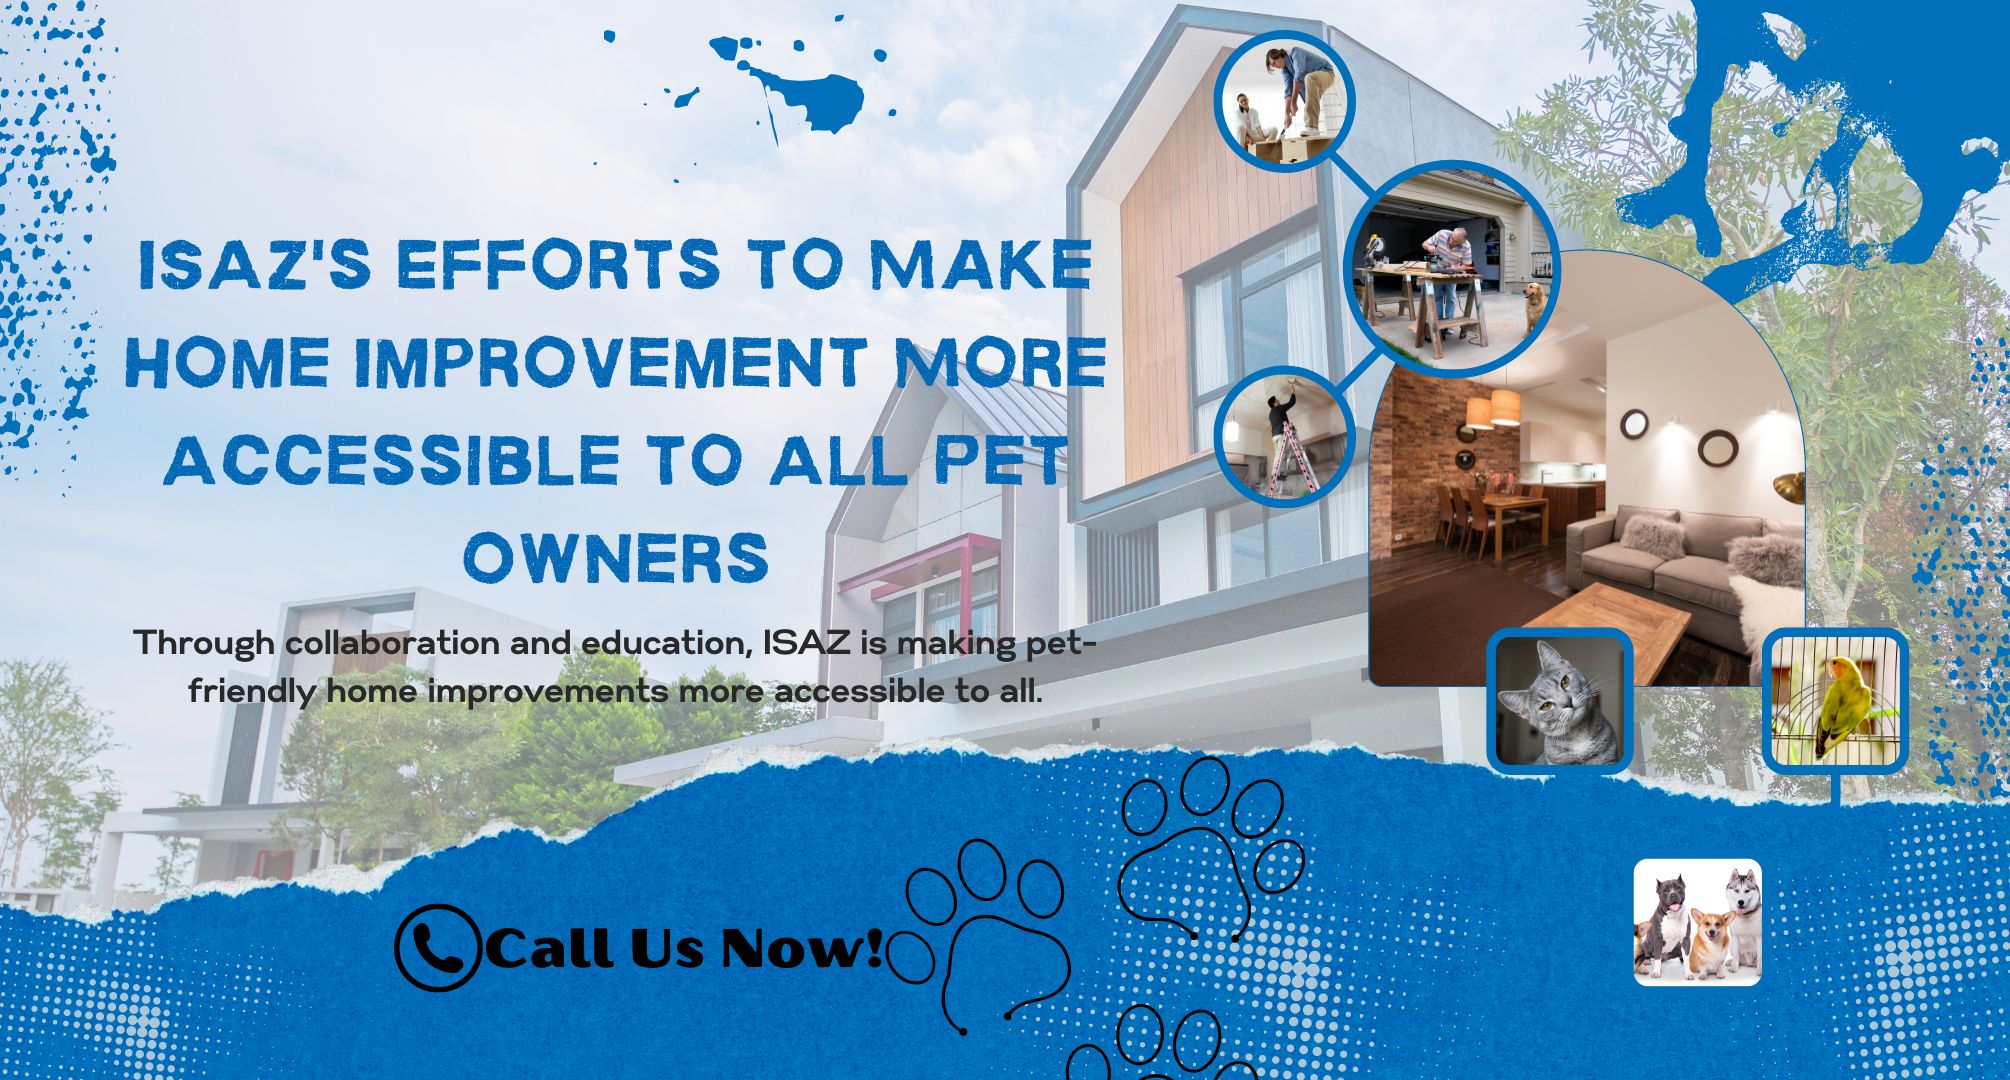 ISAZ's Efforts to Make Home Improvement More Accessible to All Pet Owners
